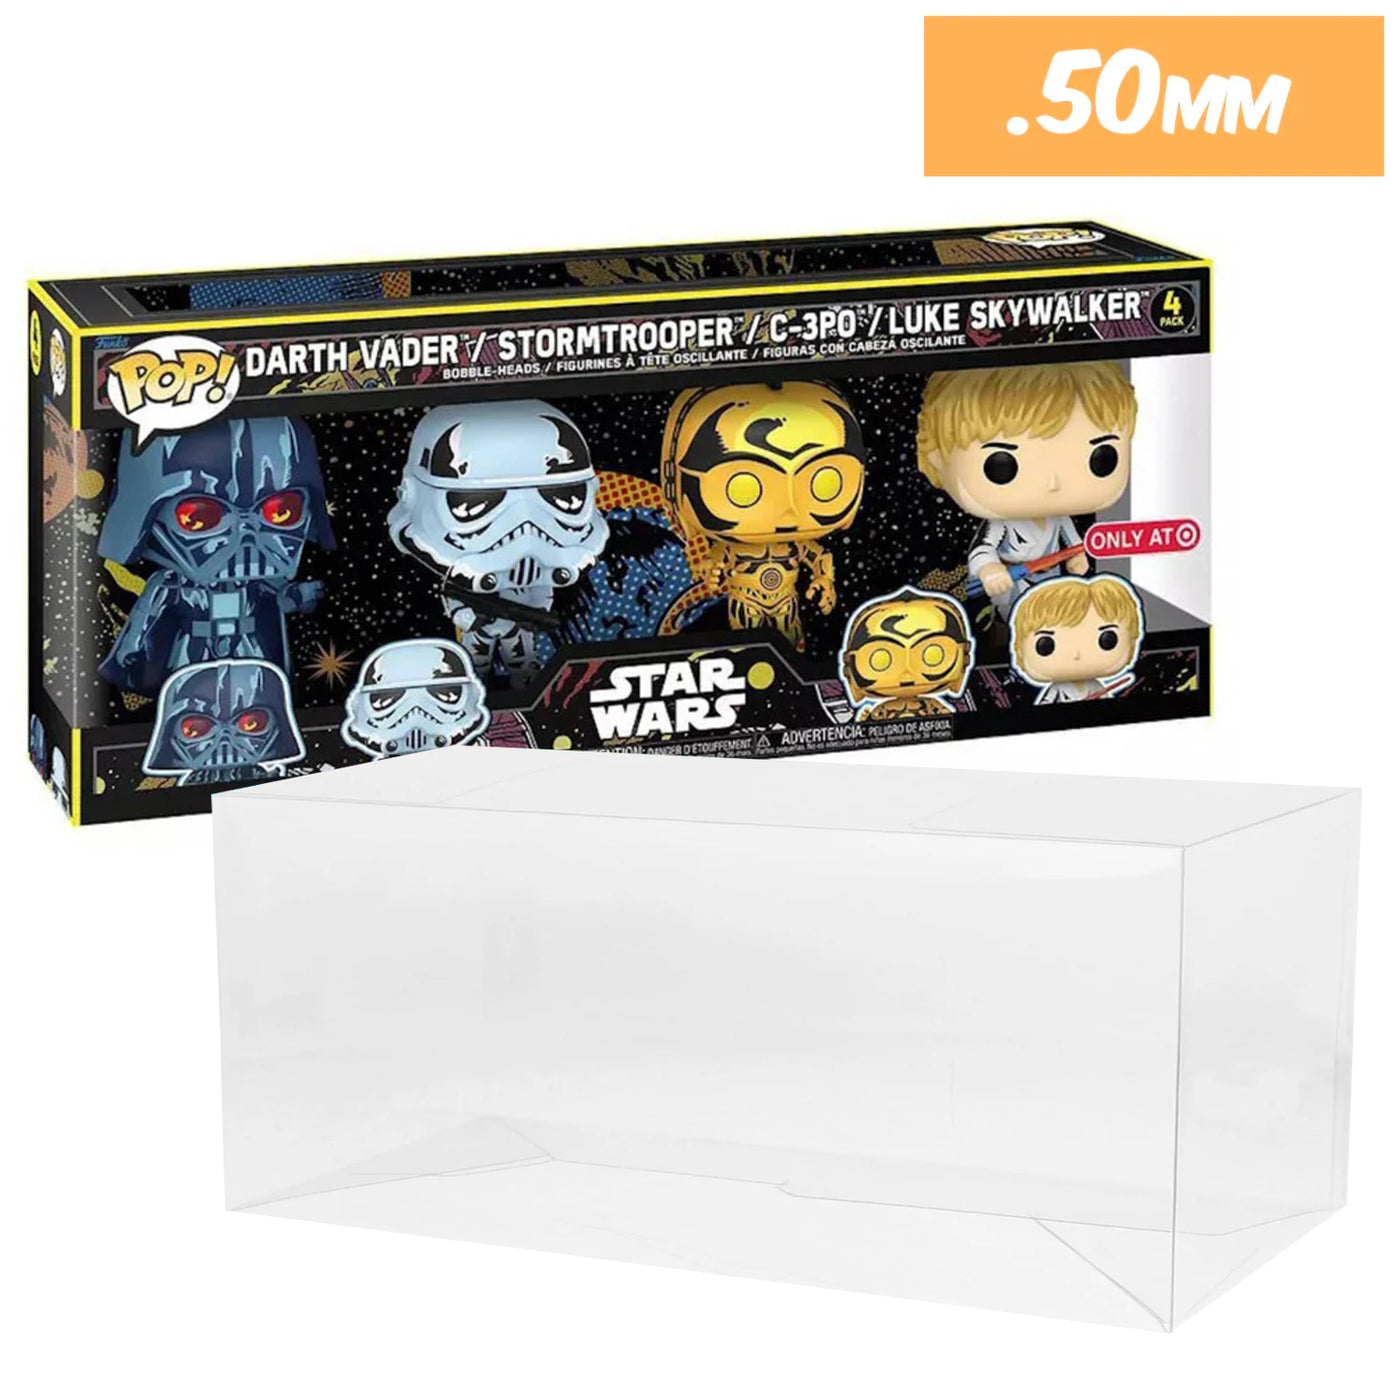 star wars retro target 4 pack best funko pop protectors thick strong uv scratch flat top stack vinyl display geek plastic shield vaulted eco armor fits collect protect display case kollector protector